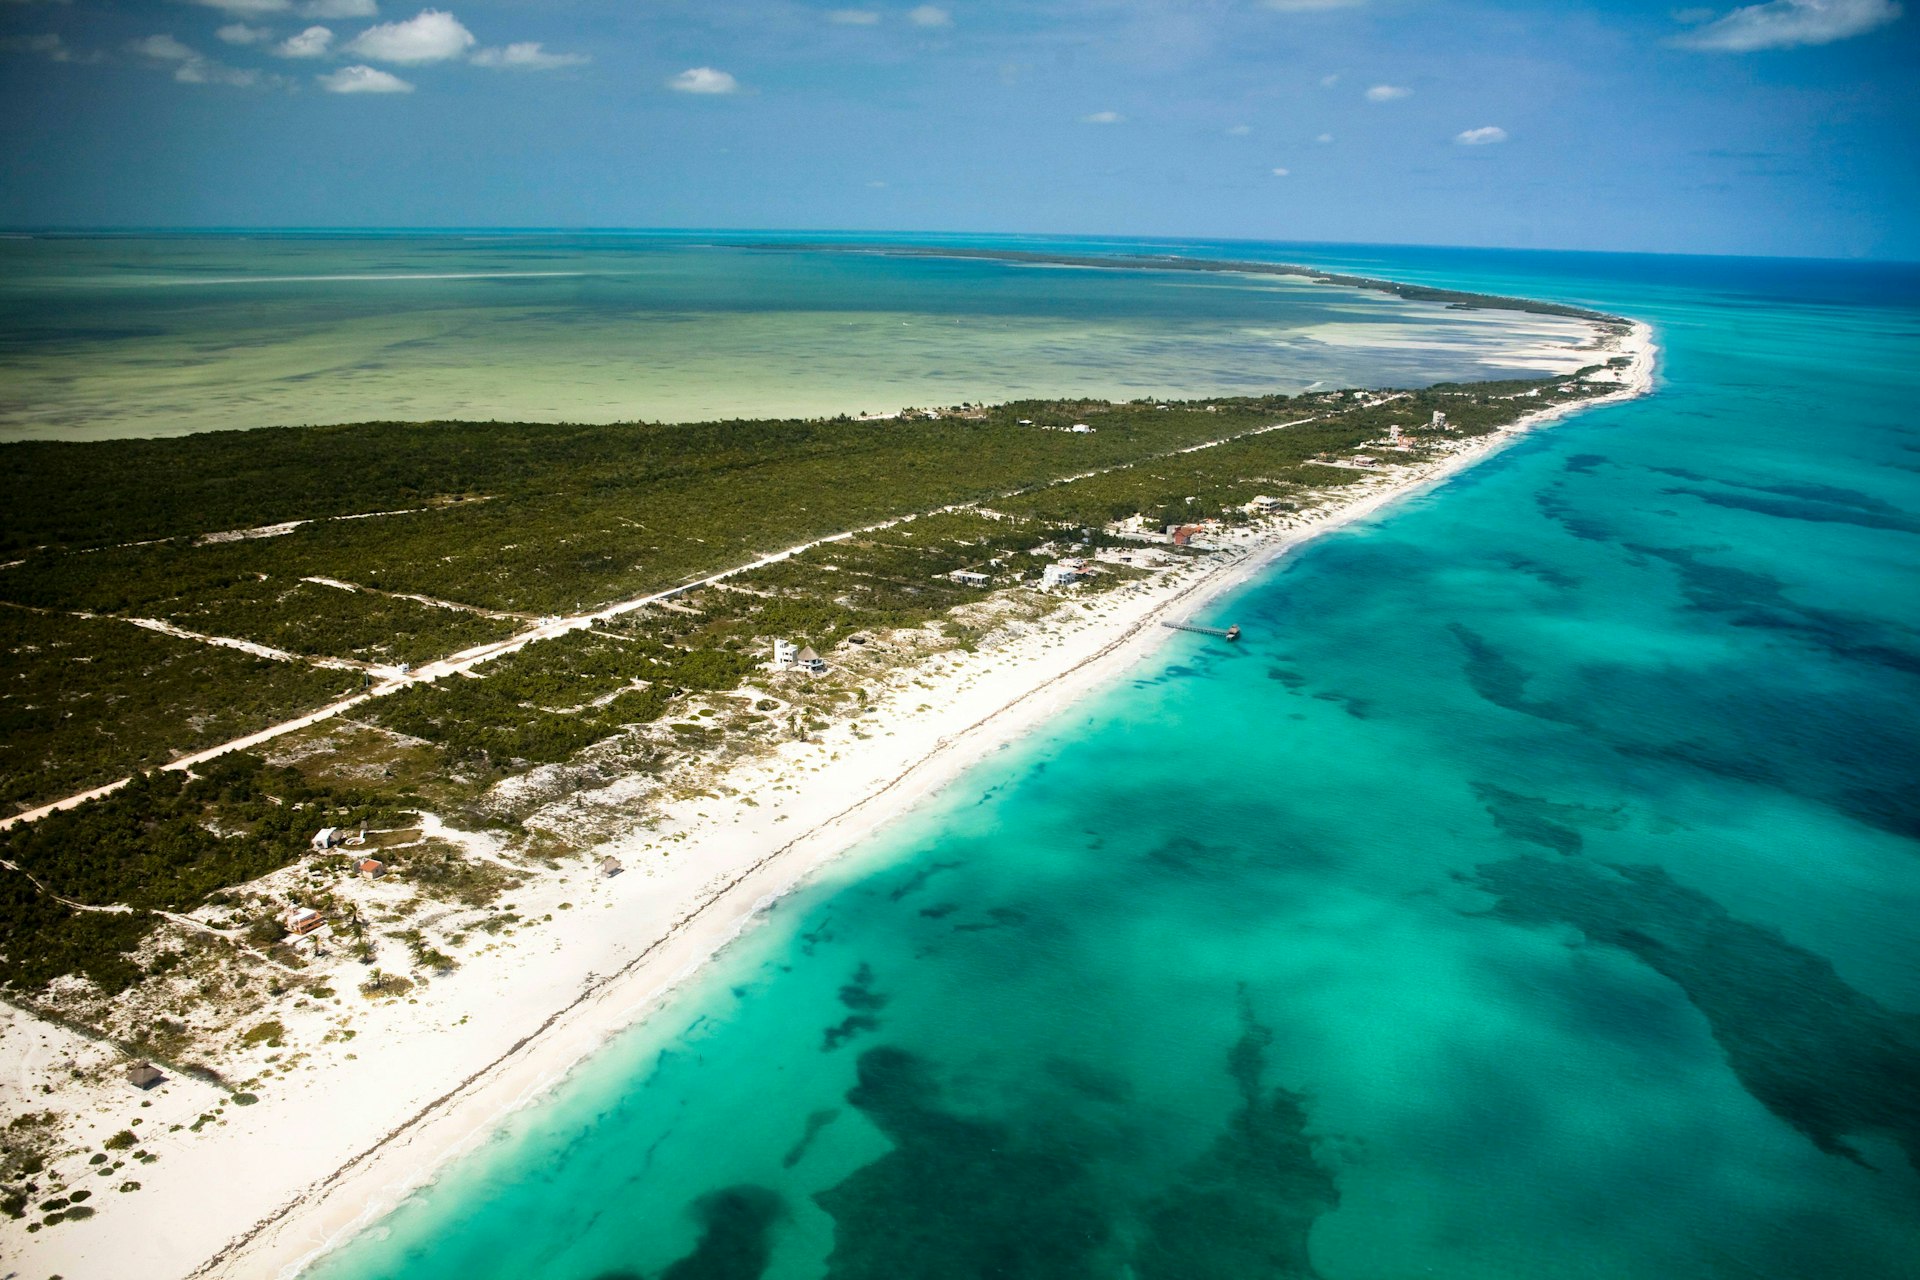 An aerial view of a pristine and undeveloped stretch of coastline with turquoise seas